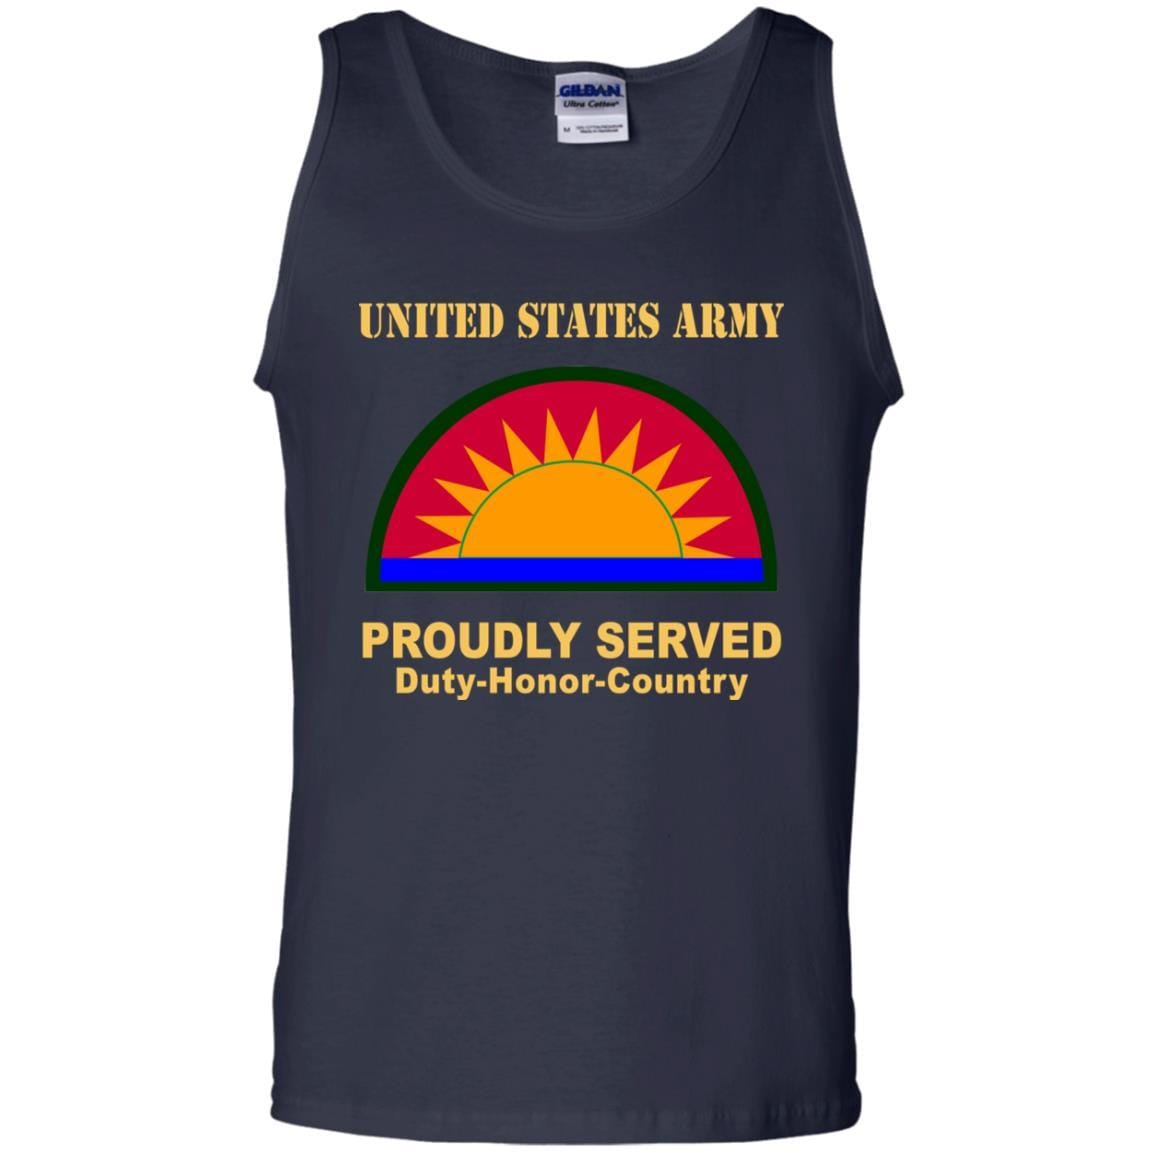 US ARMY 41ST INFANTRY BRIGADE COMBAT TEAM- Proudly Served T-Shirt On Front For Men-TShirt-Army-Veterans Nation